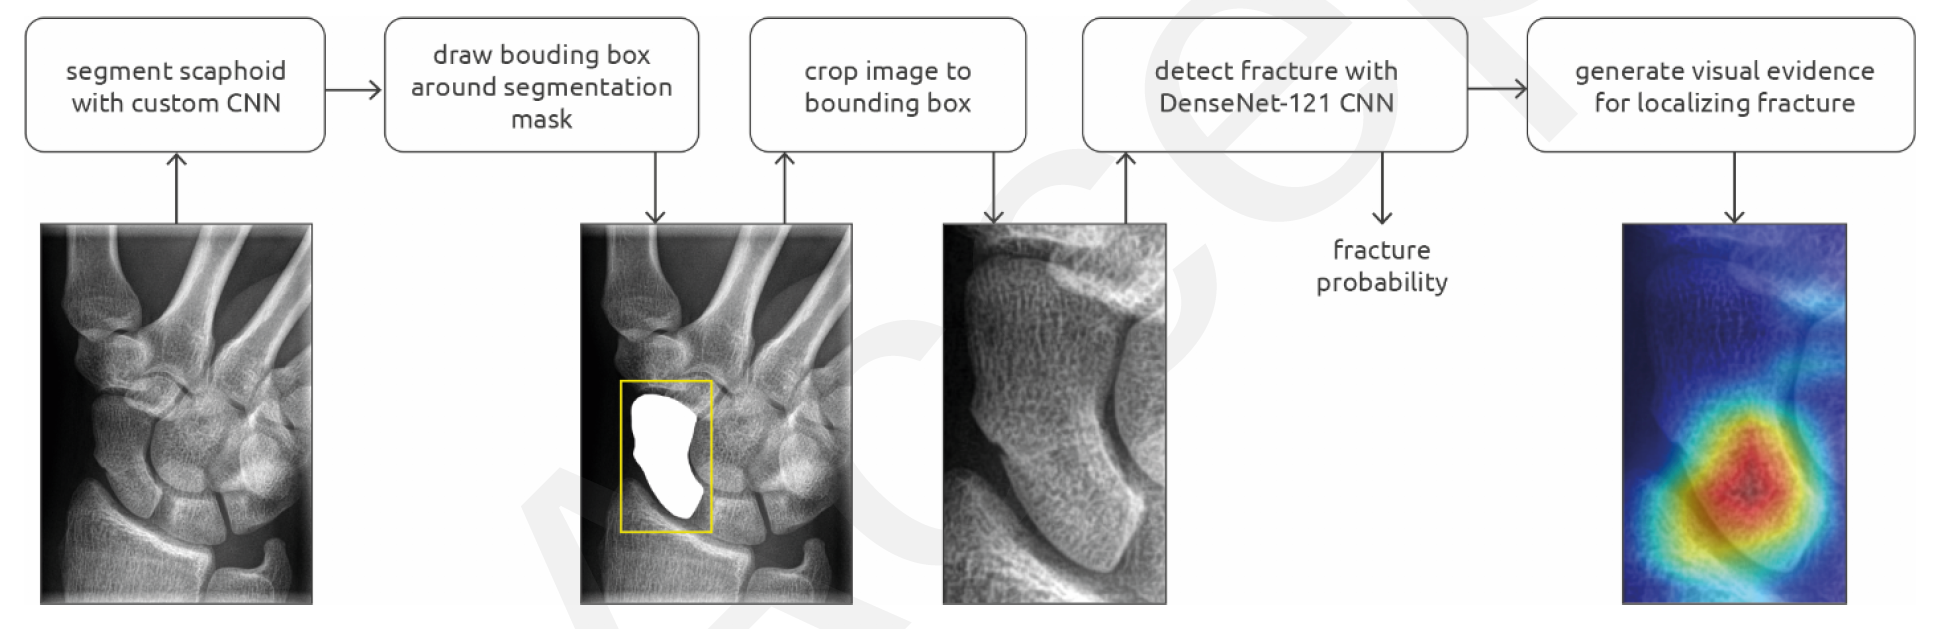 Overview of the scaphoid fracture detection pipeline, which consisted of a segmentation and detection convolutional neural network (CNN). A class activation map is calculated and visualized as a heatmap for fracture localization.



Credit: RSNA

